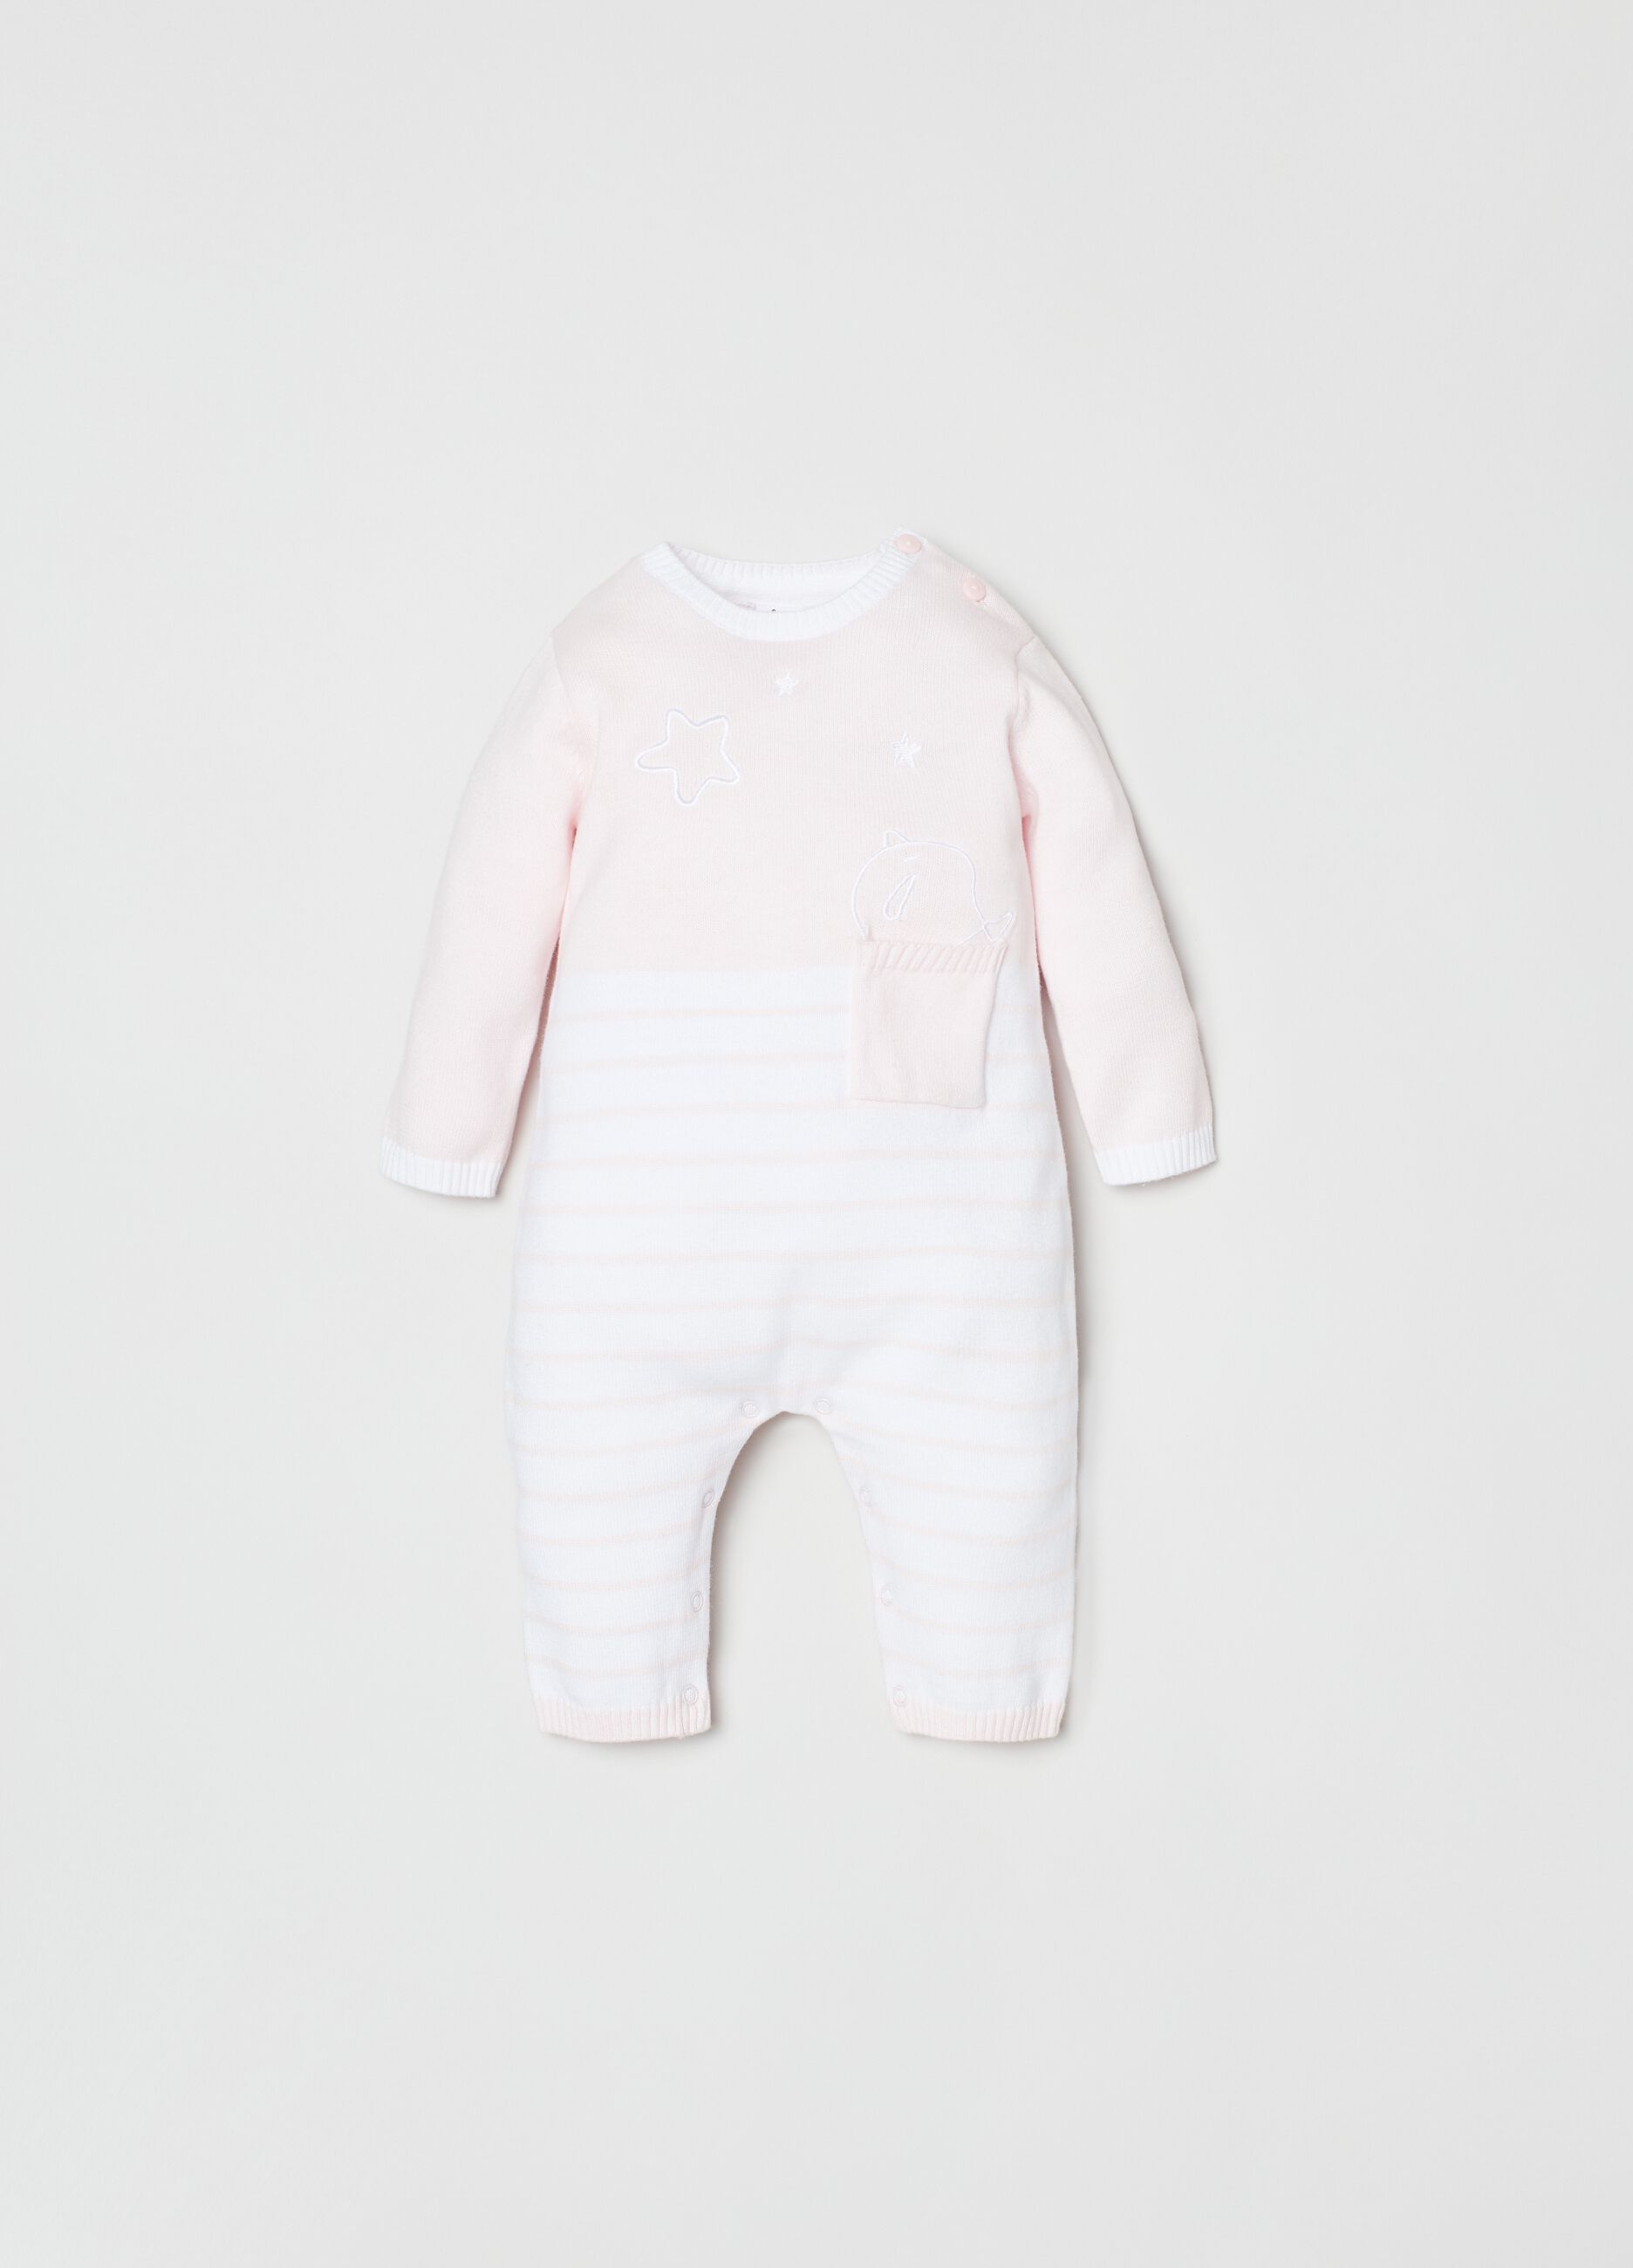 Striped jersey onesie with embroidery